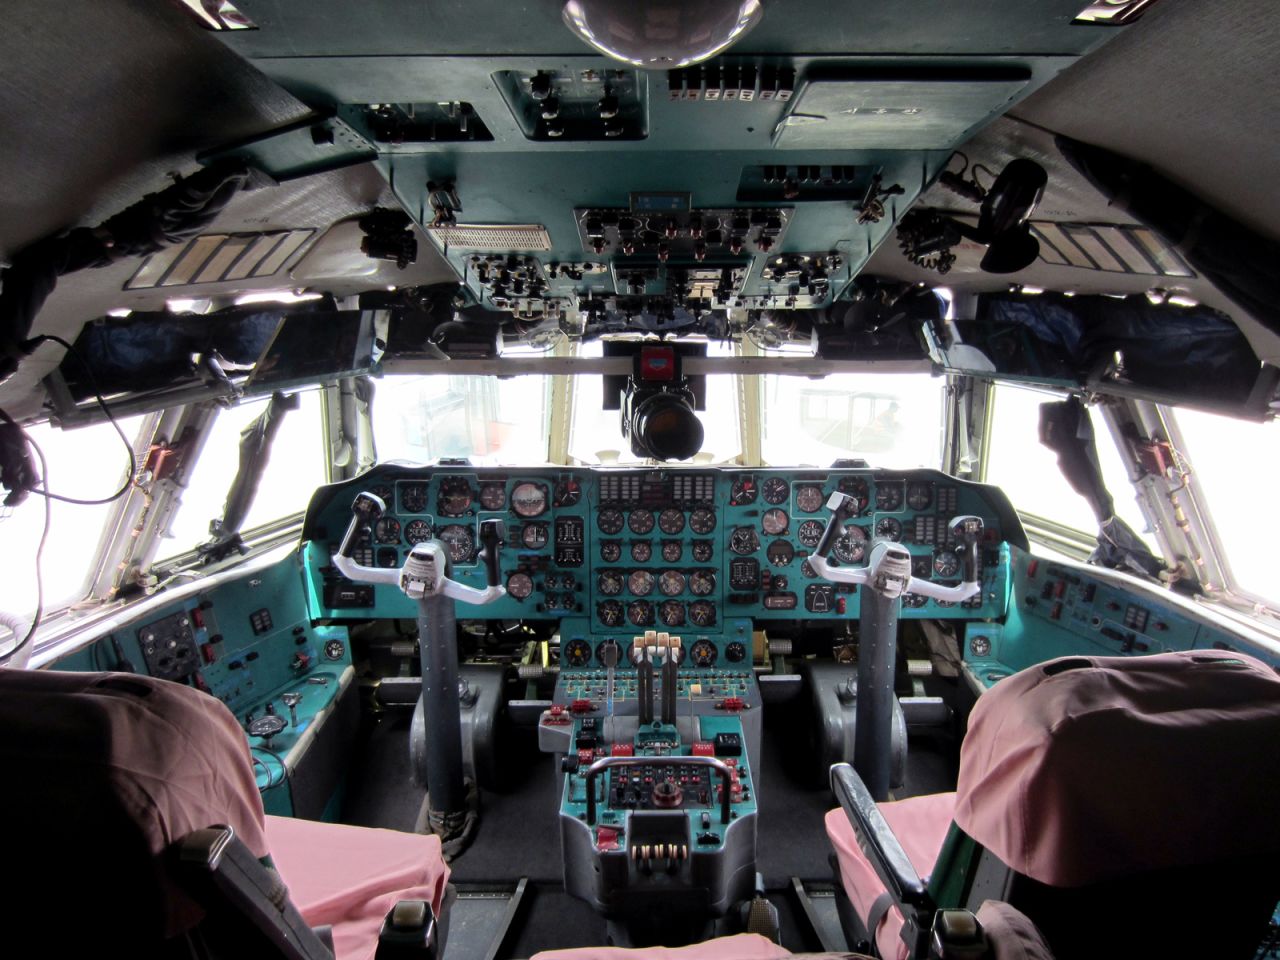 If you were on the flight crew of Air Koryo's Il-76, this would be your office. 